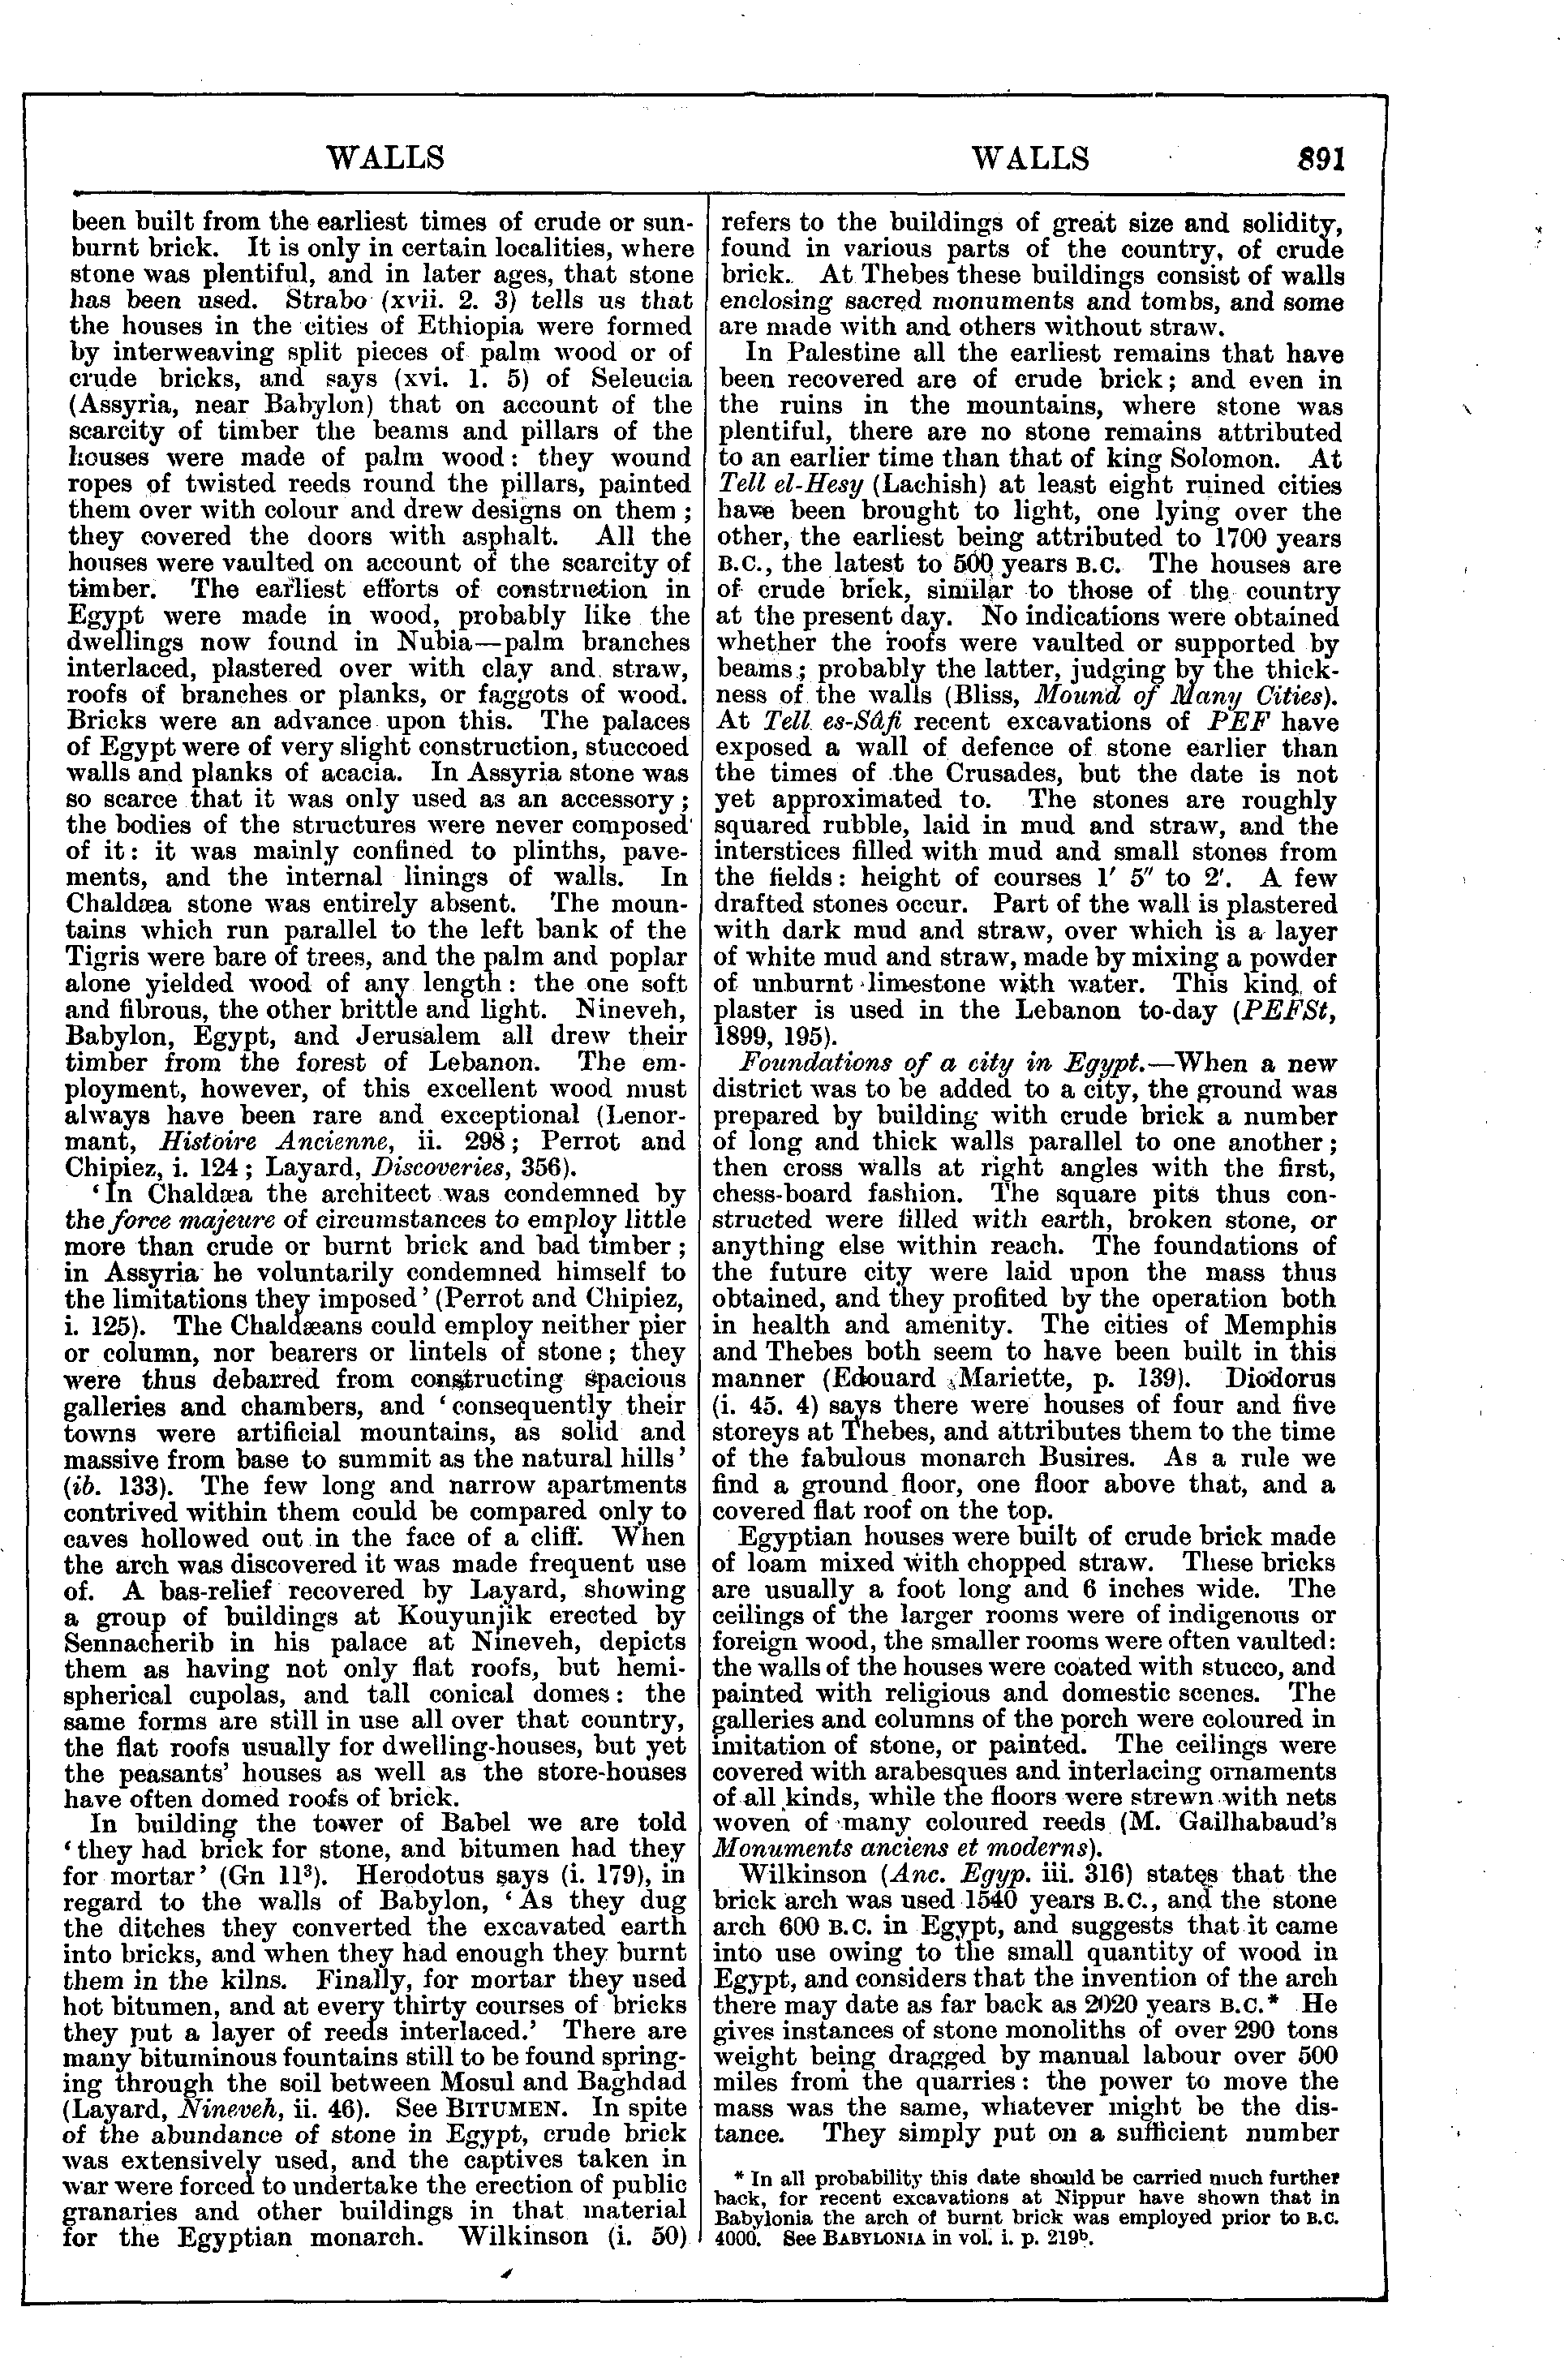 Image of page 891